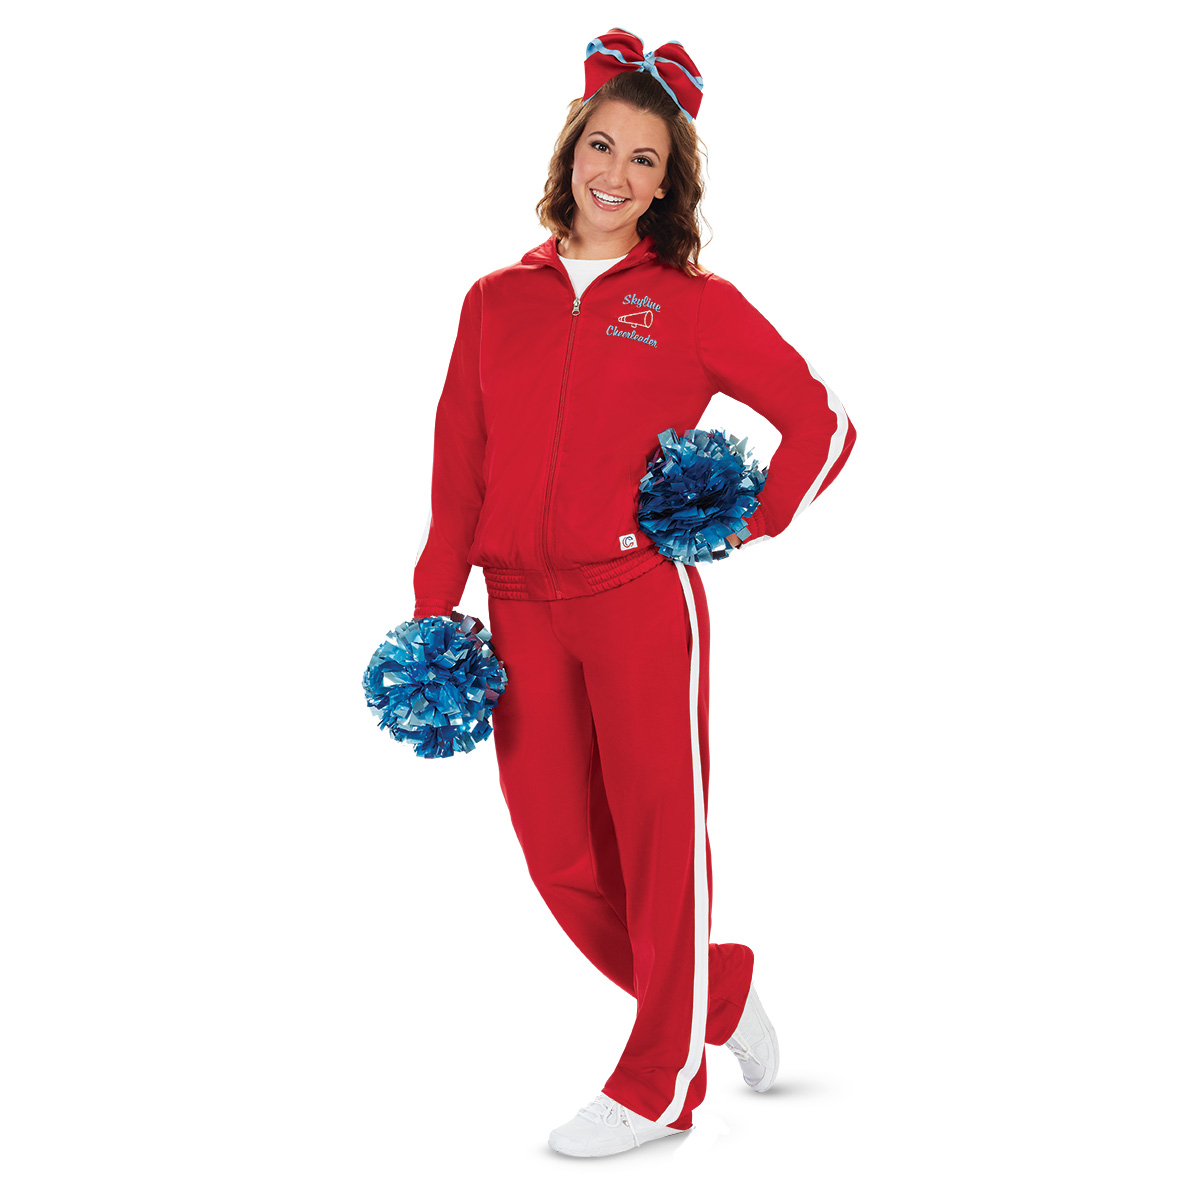 Rival Cheer Warmup Package by CC SpiritWear